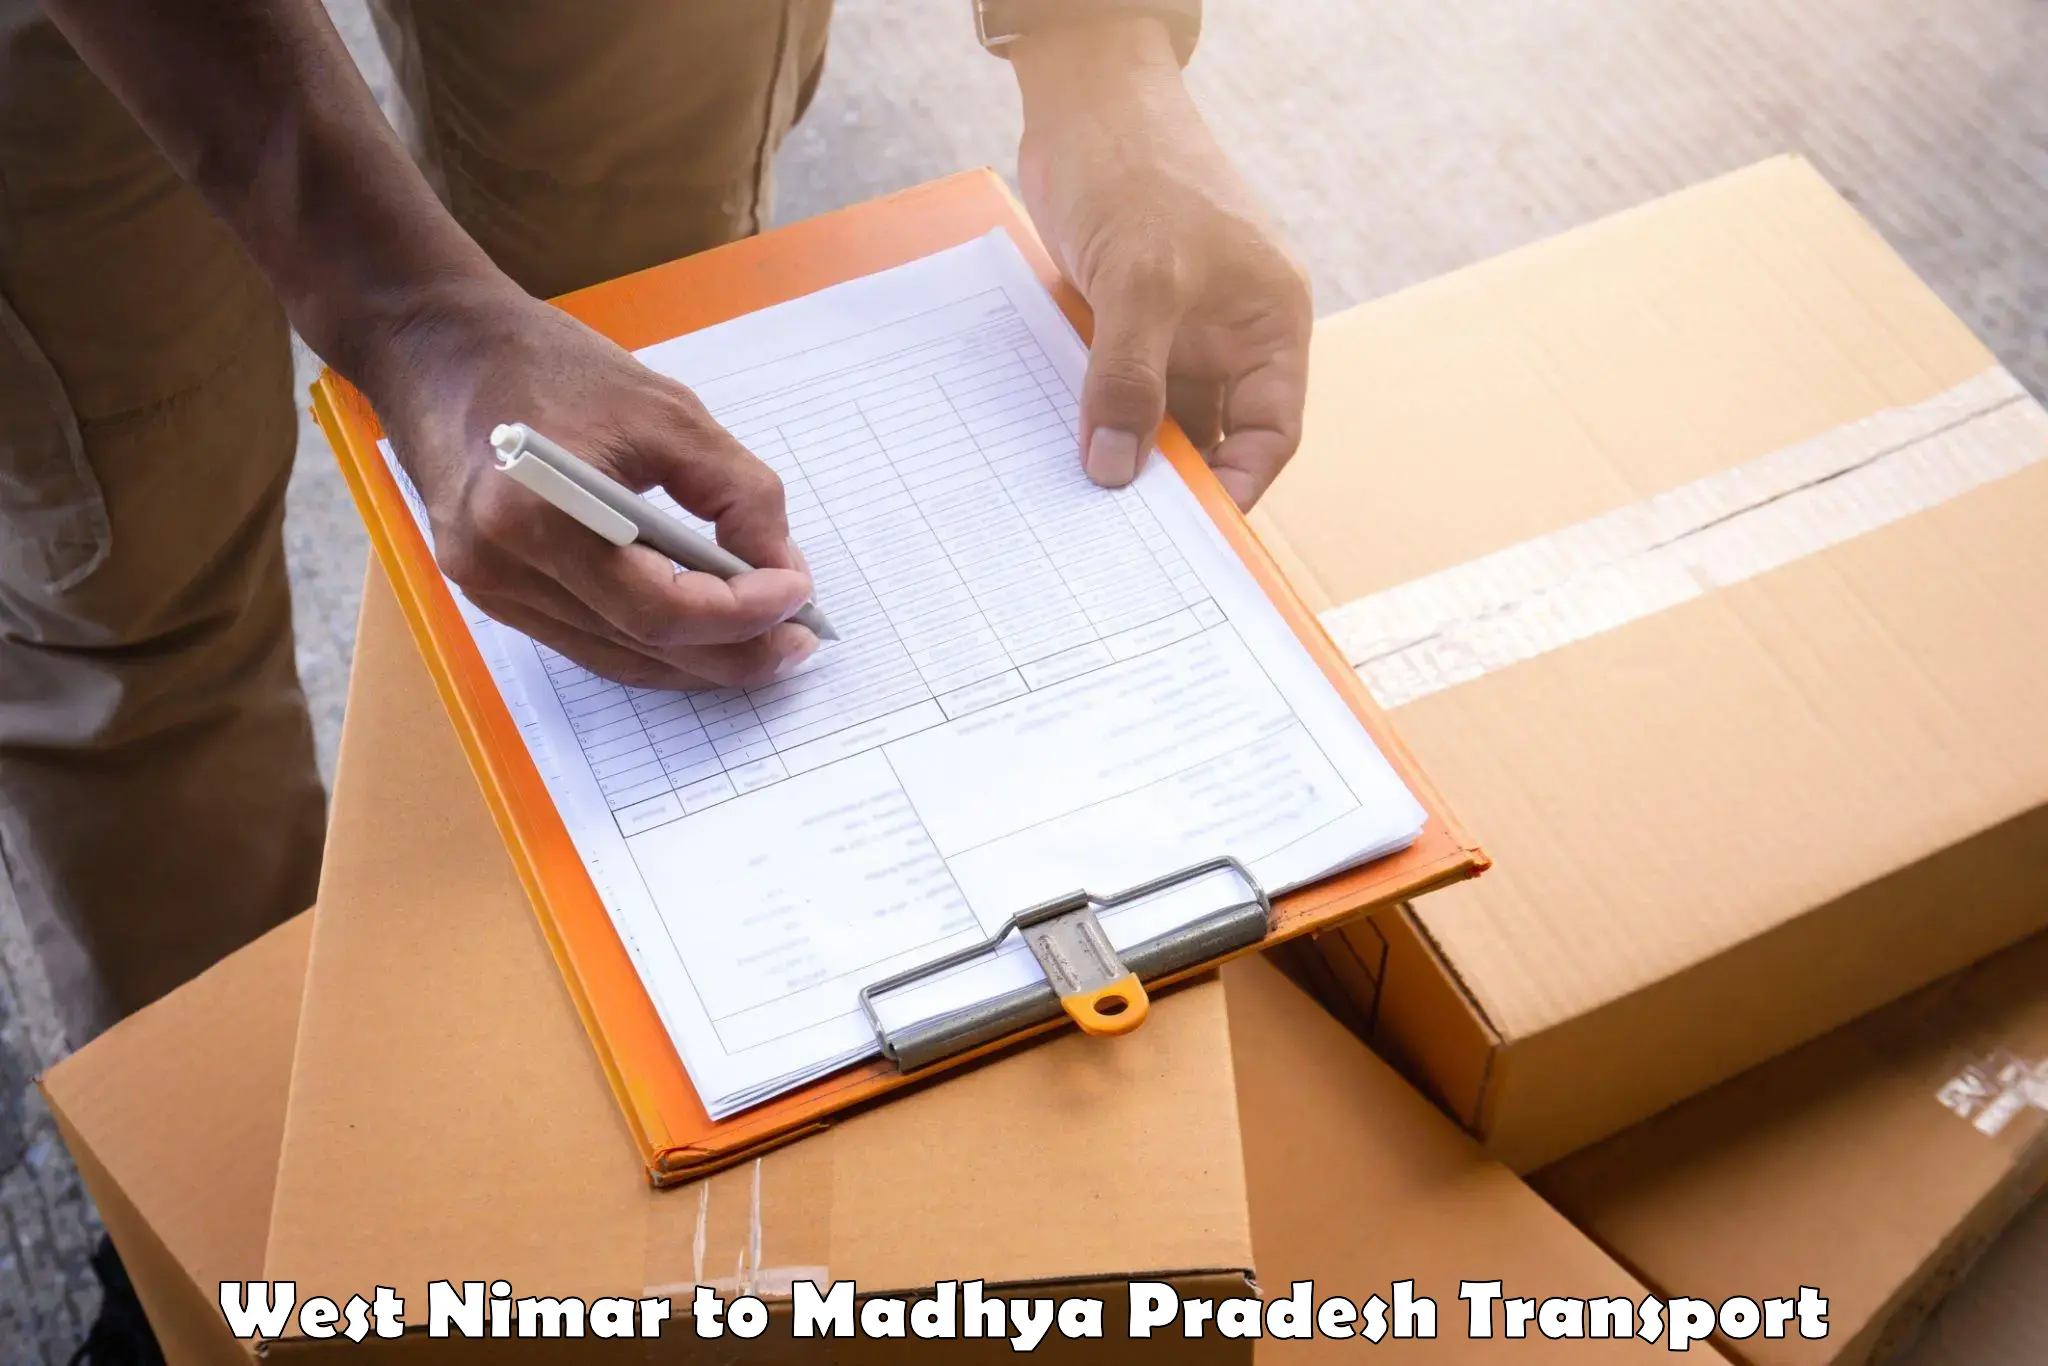 Air freight transport services West Nimar to IIT Indore